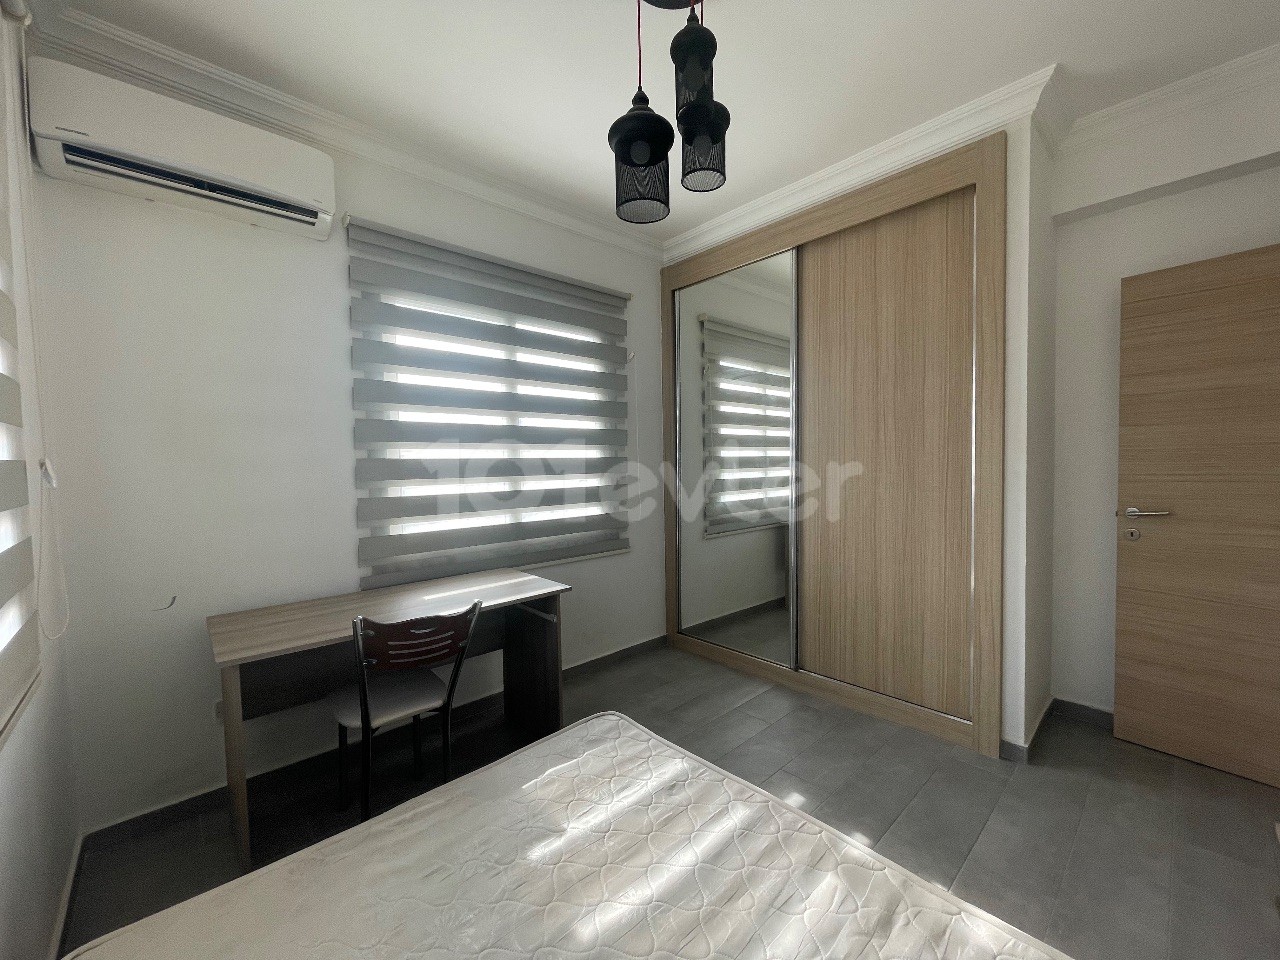 2+1 Flat for Rent in Yenikent Central Location